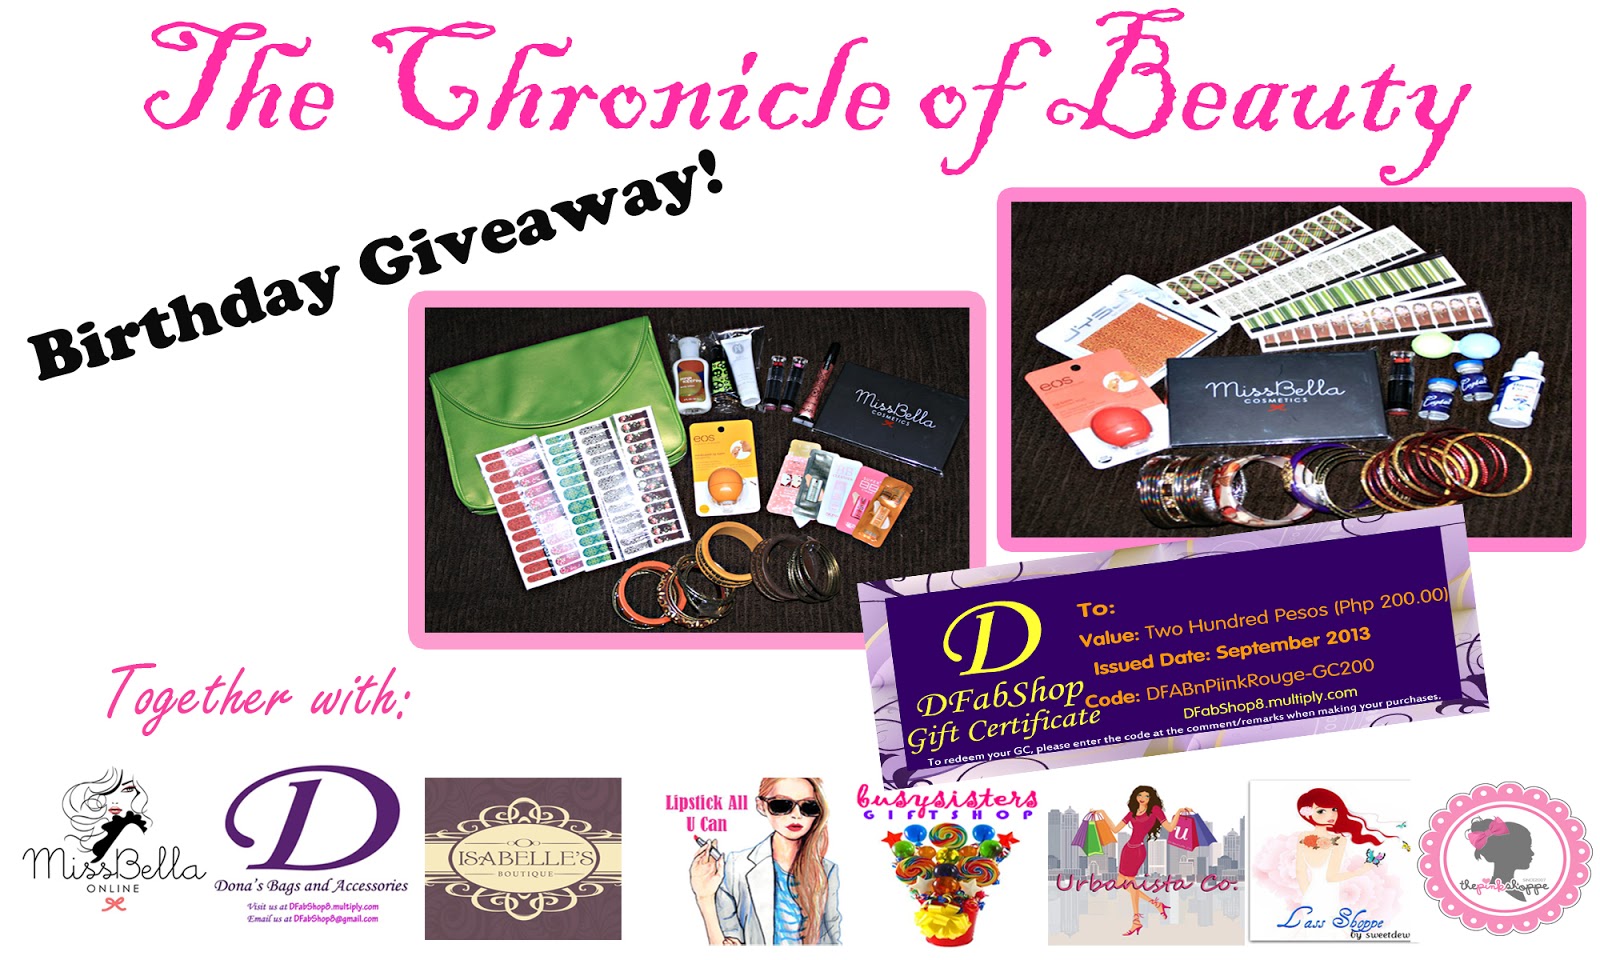 The Chronicle of Beauty Bday Giveaway